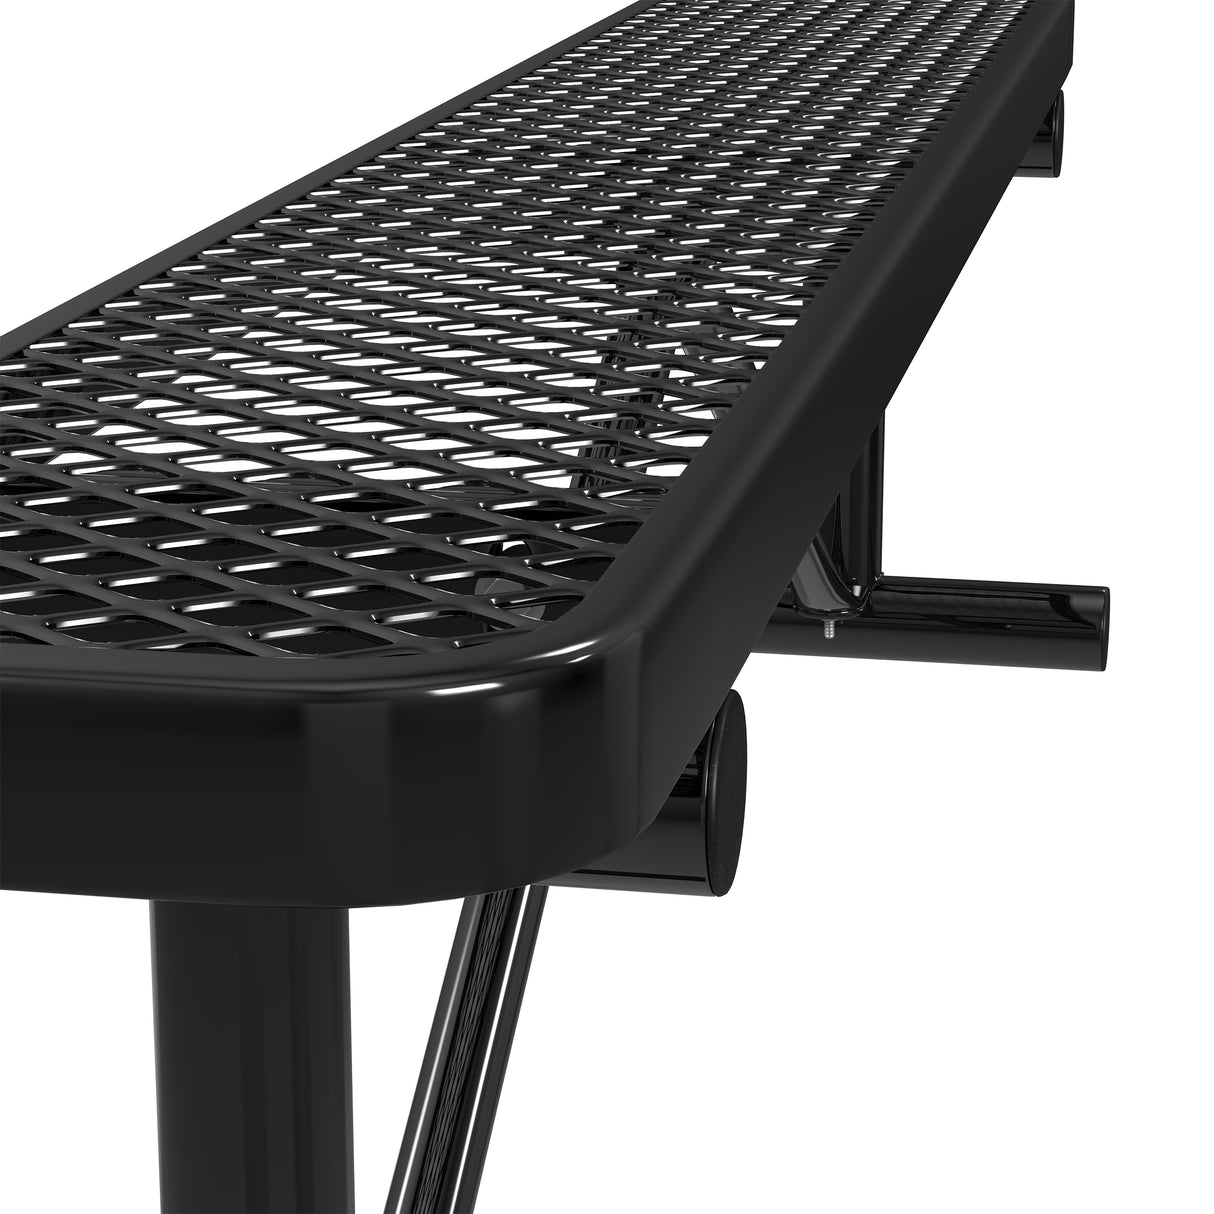 QSB6XPP 6 foot Expanded Backless Bench